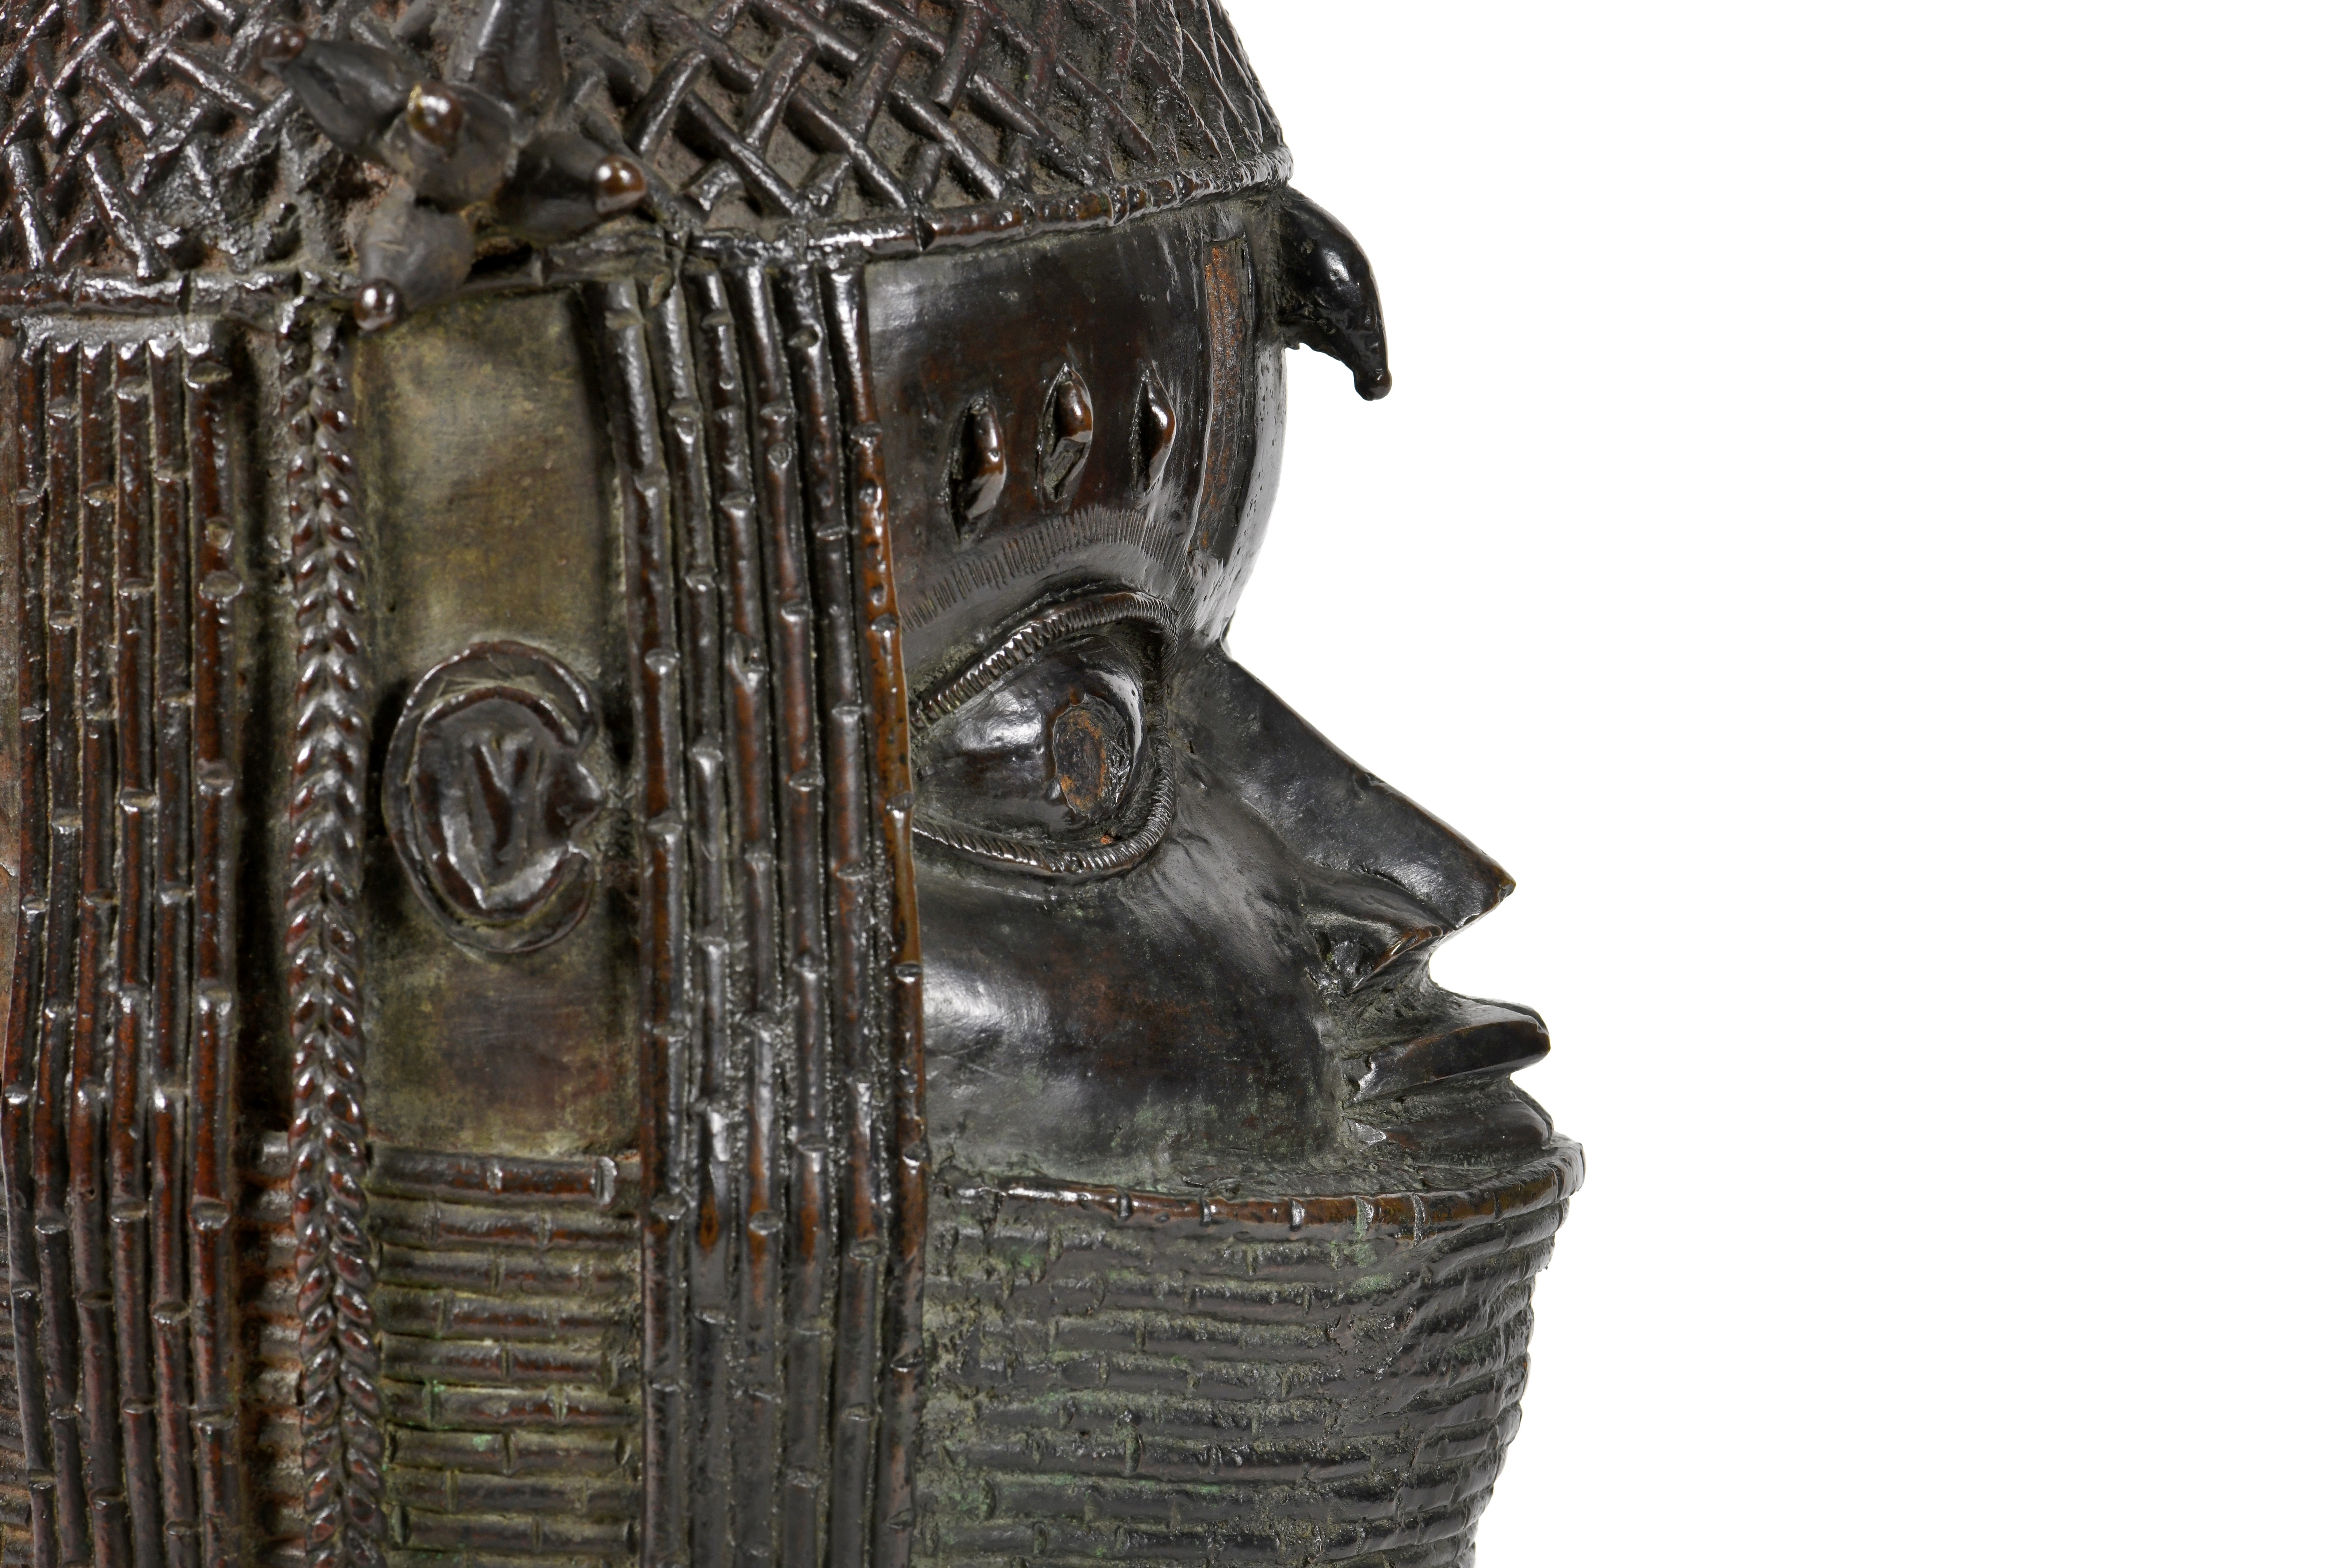 A bronze sculpture depicting an Oba (king) of Benin is seen in this handout photo